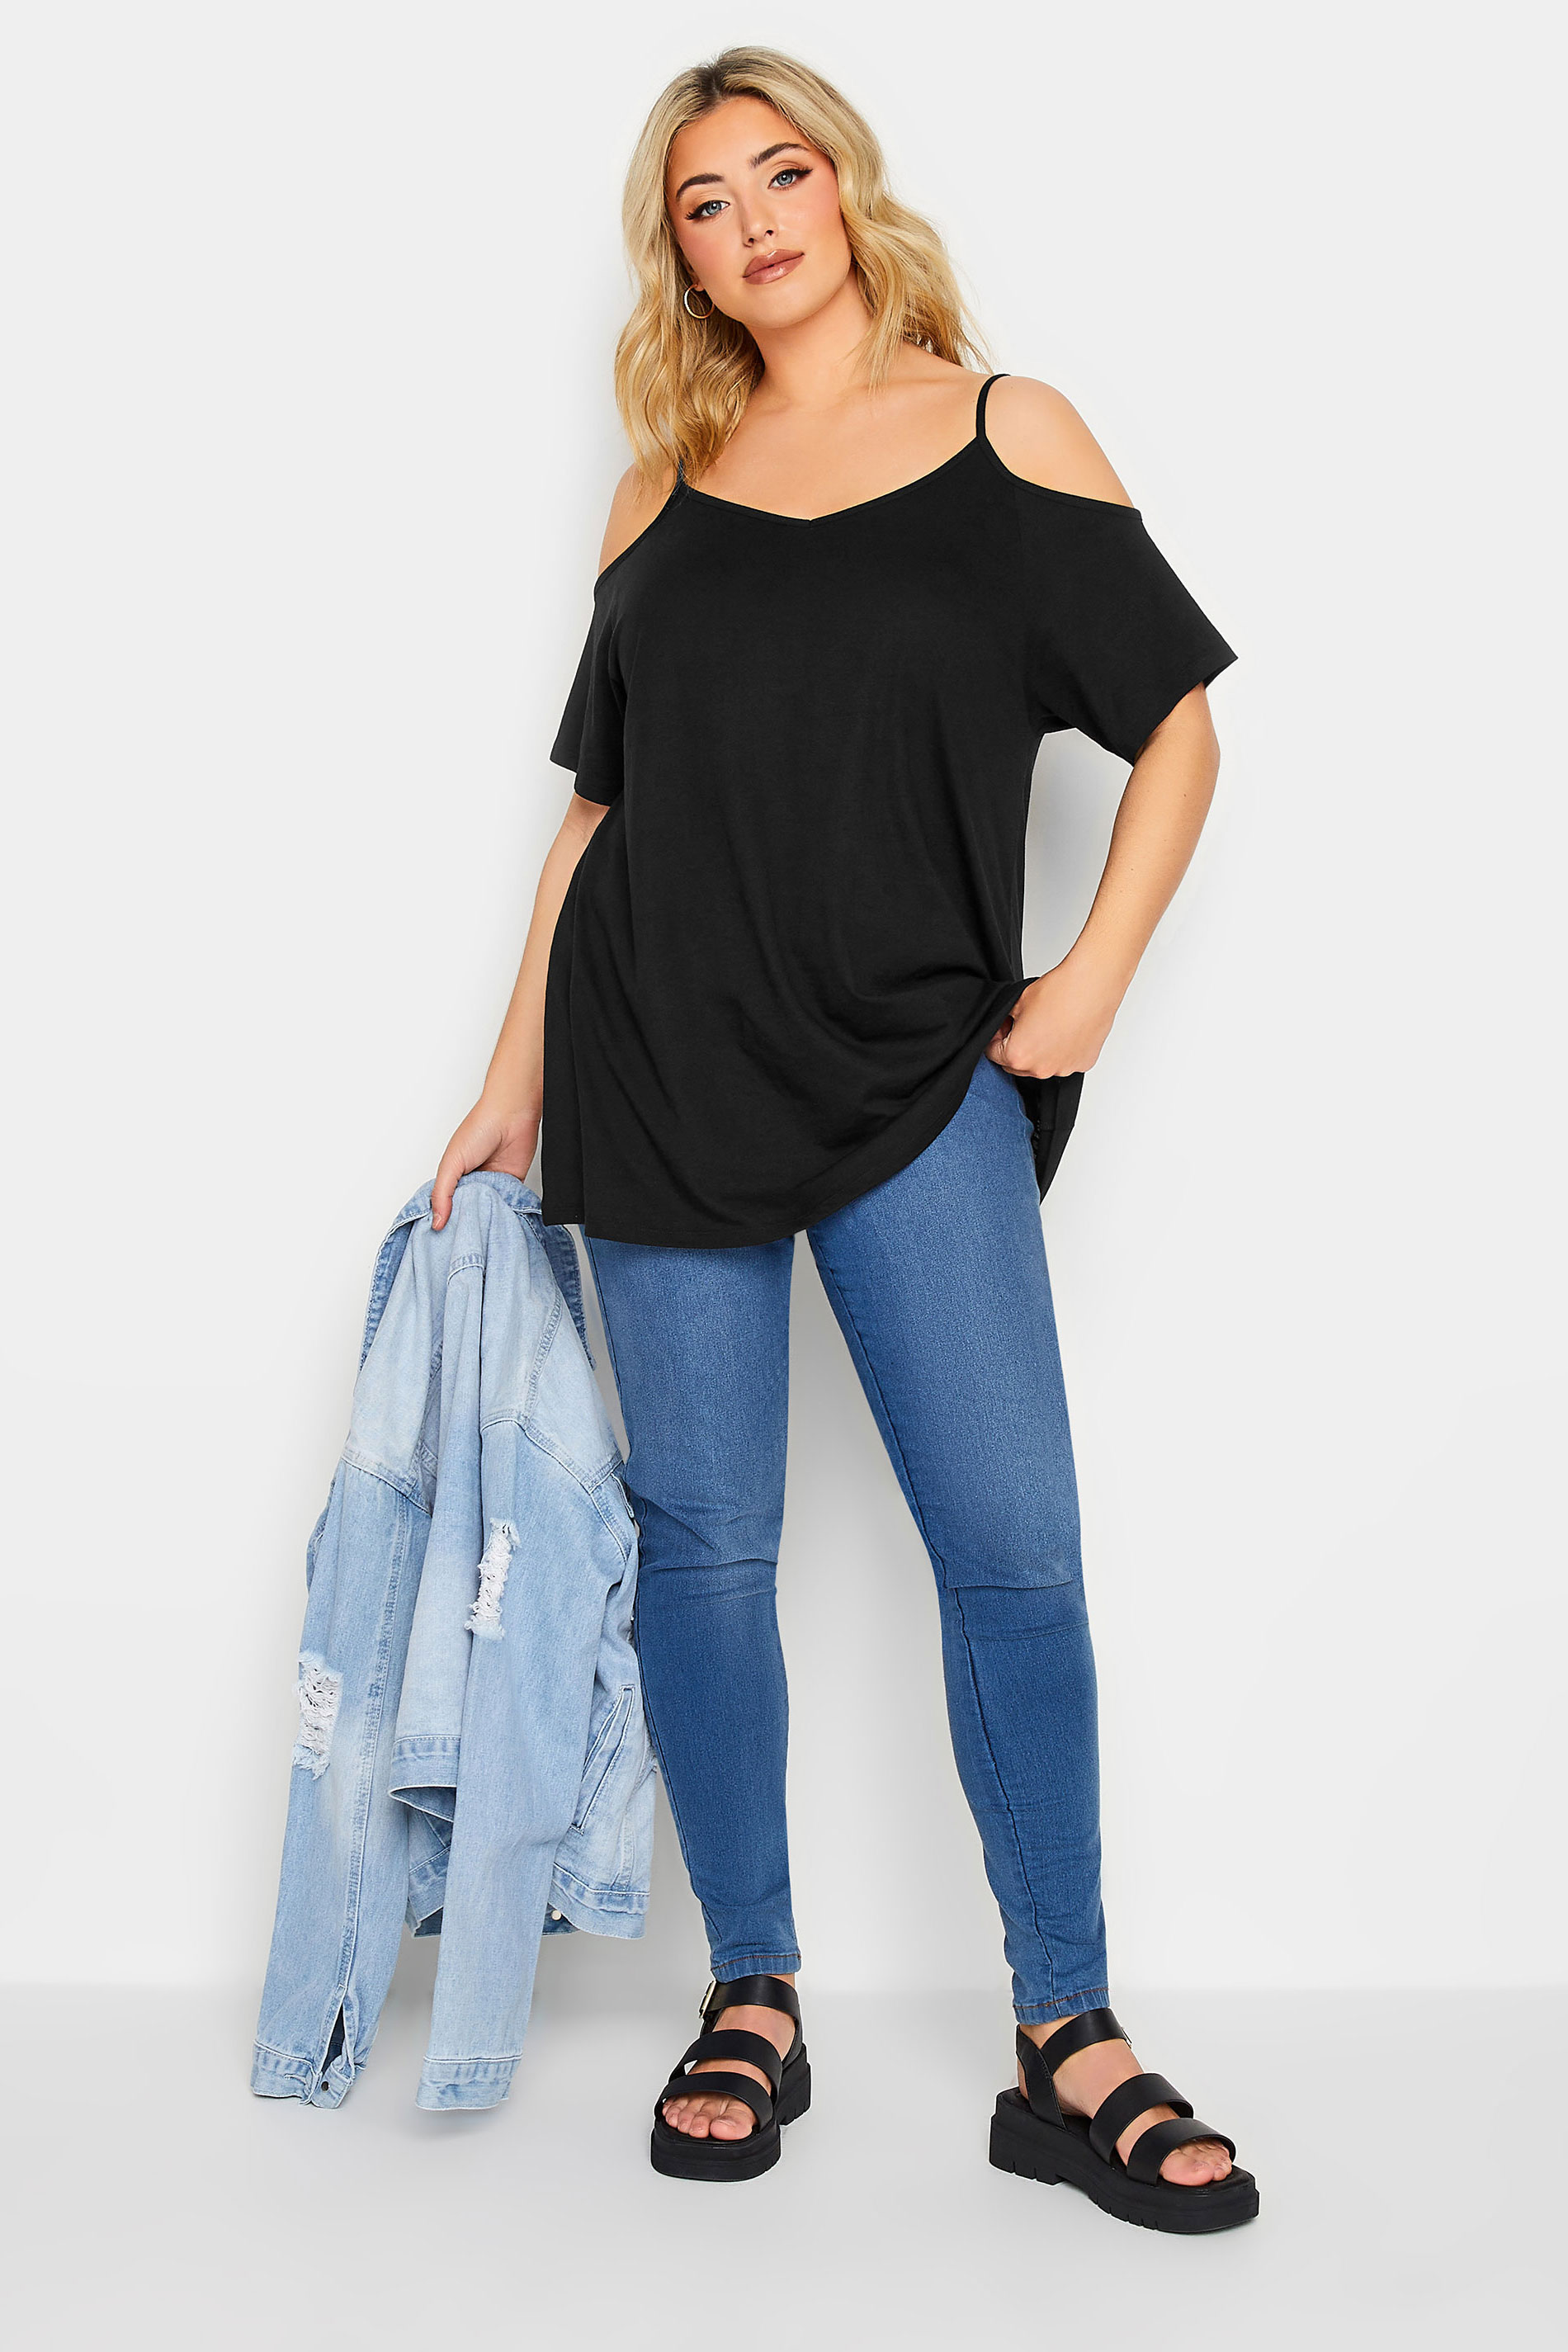 YOURS Plus Size 2 PACK Black Cold Shoulder T-Shirts| Yours Clothing  3